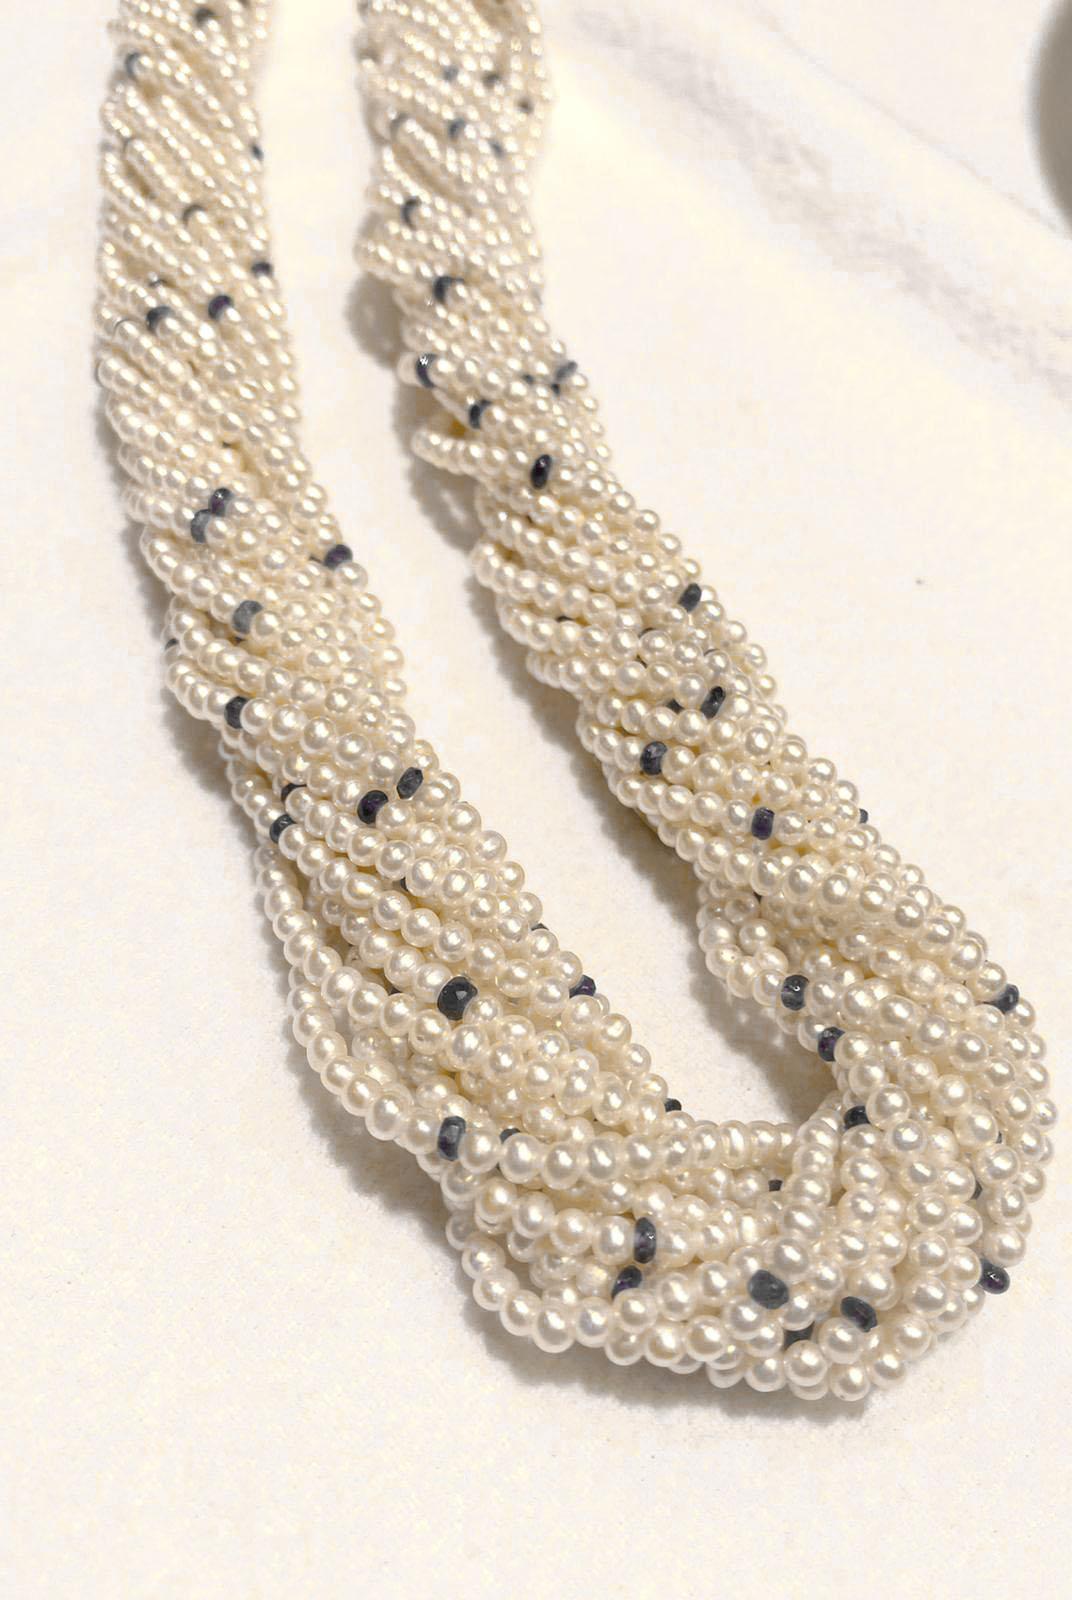 15 strands of biwa pearls with sapphire beads and a 14k yellow gold clasp 18inches about 3mm #IP21
